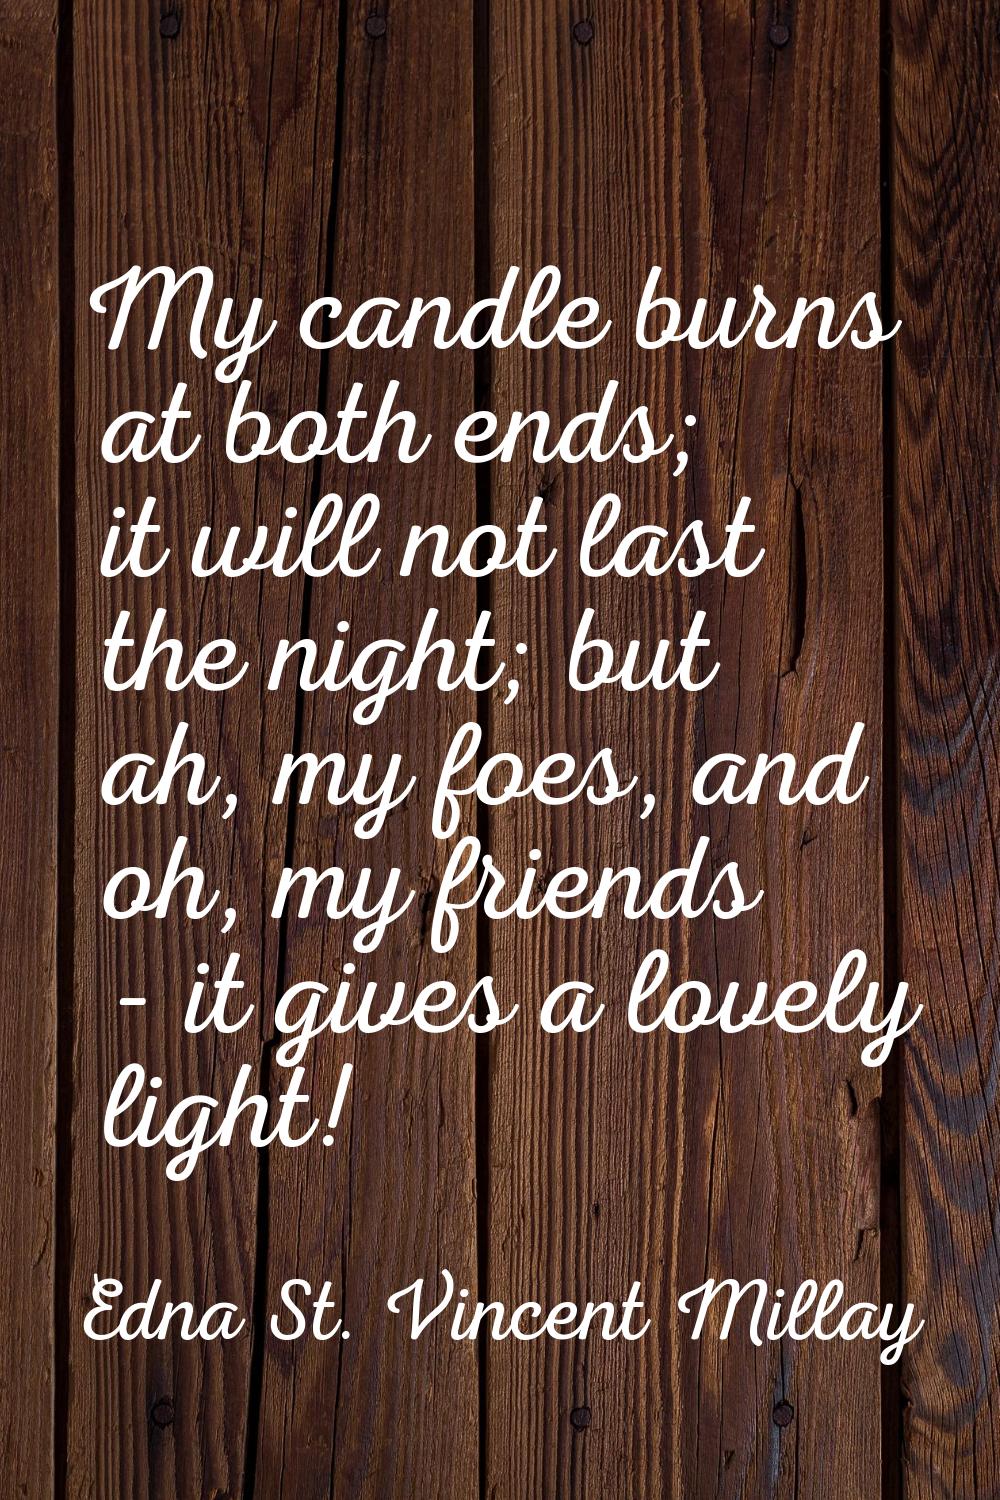 My candle burns at both ends; it will not last the night; but ah, my foes, and oh, my friends - it 